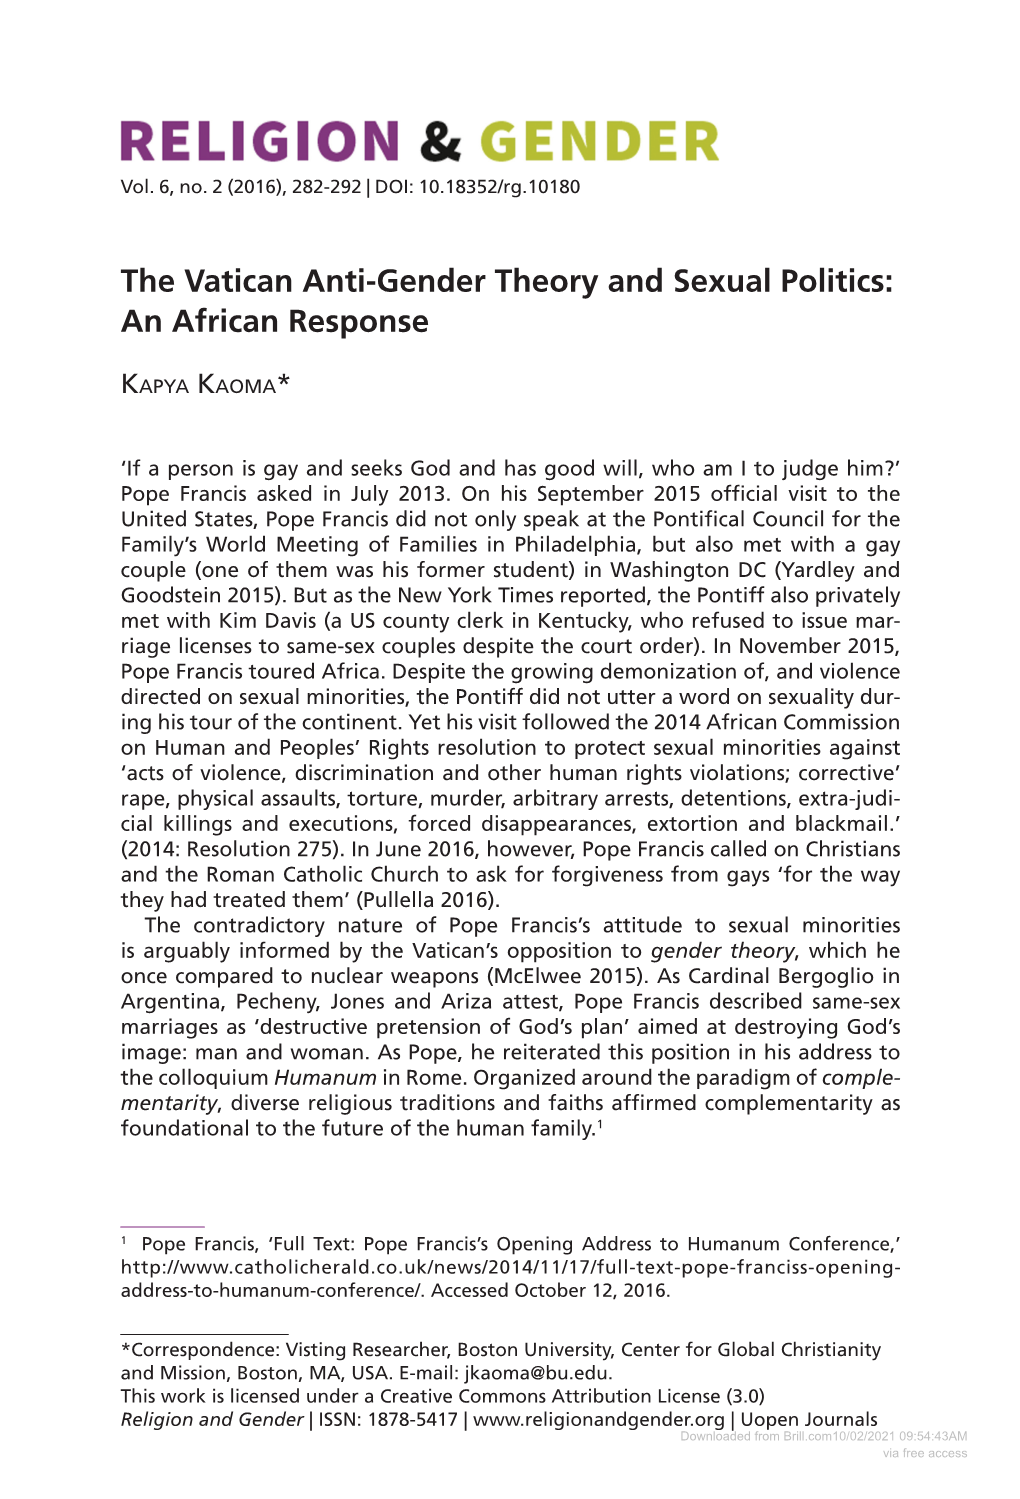 The Vatican Anti-Gender Theory and Sexual Politics: an African Response